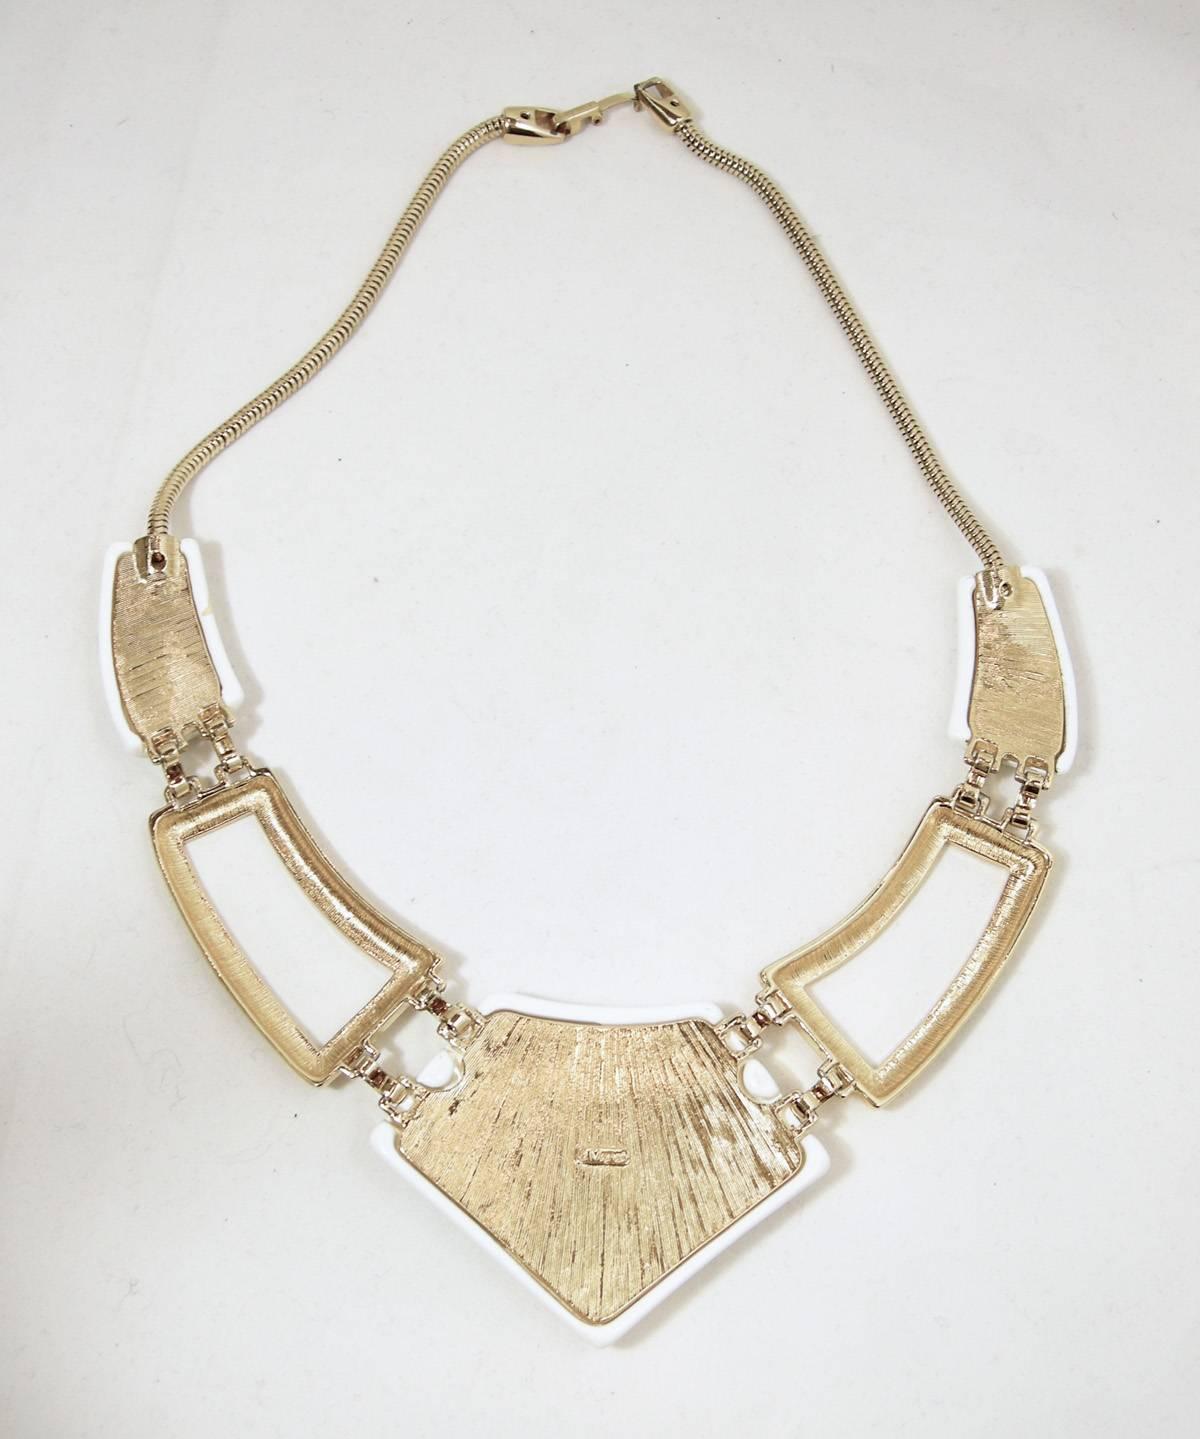 Monet Vintage Signed White Enamel Moderne Necklace In Excellent Condition For Sale In New York, NY